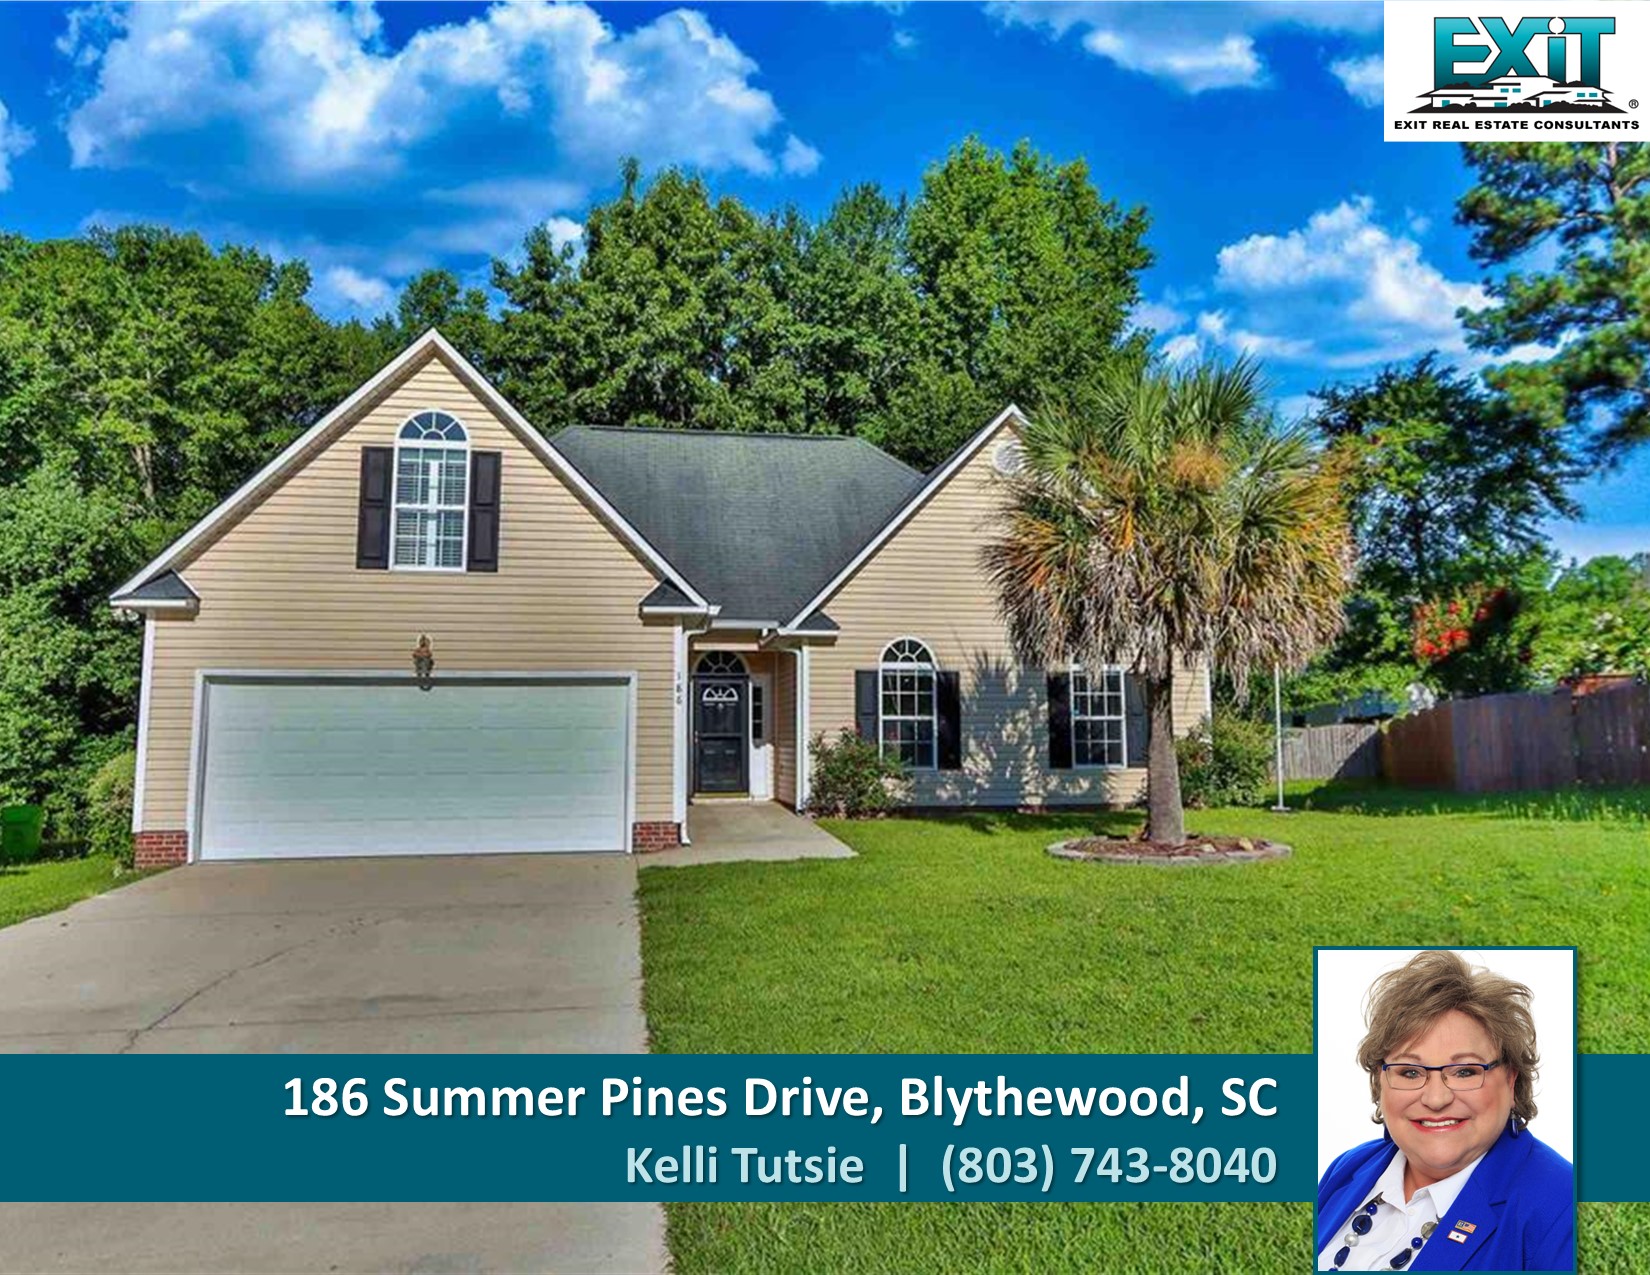 Just listed in Summer Pines - Blythewood